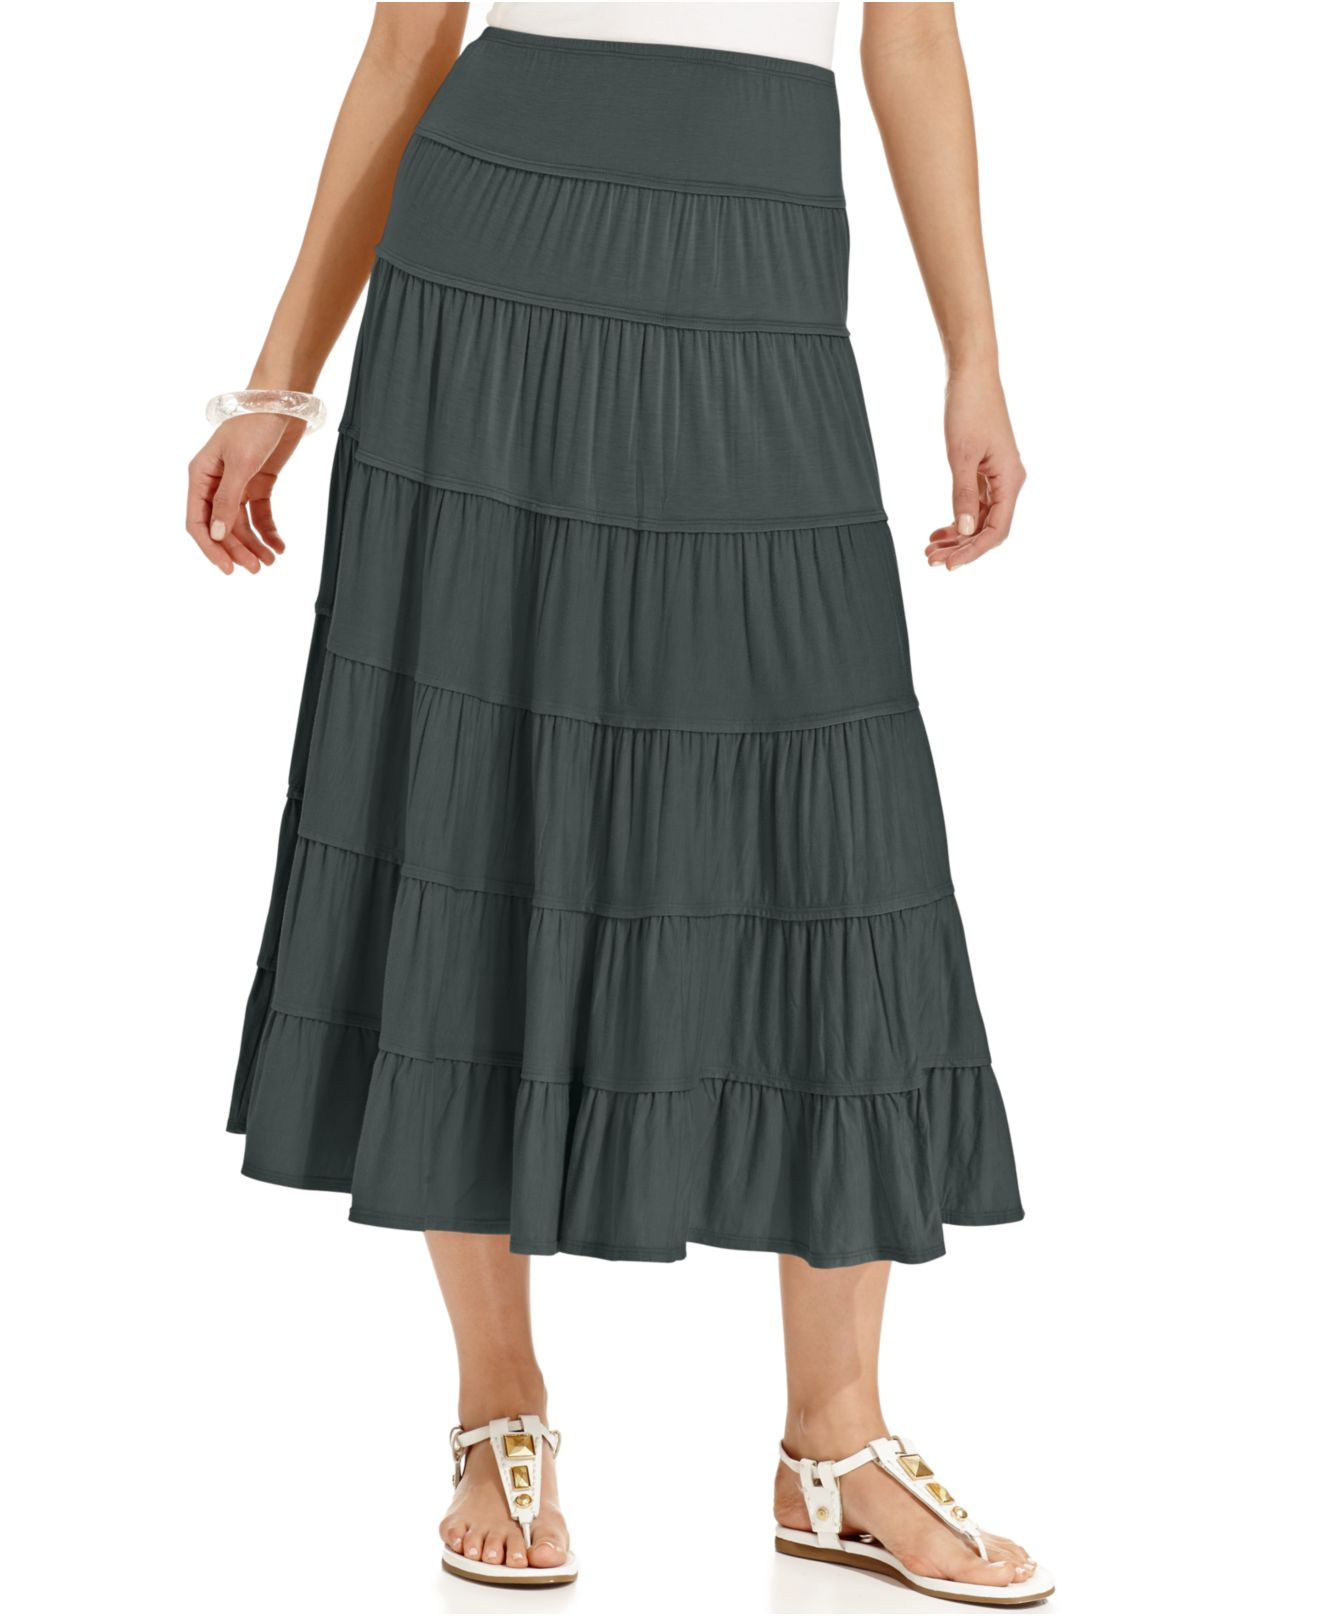 Lyst - Style & Co. Petite Tiered Maxi Skirt in Gray